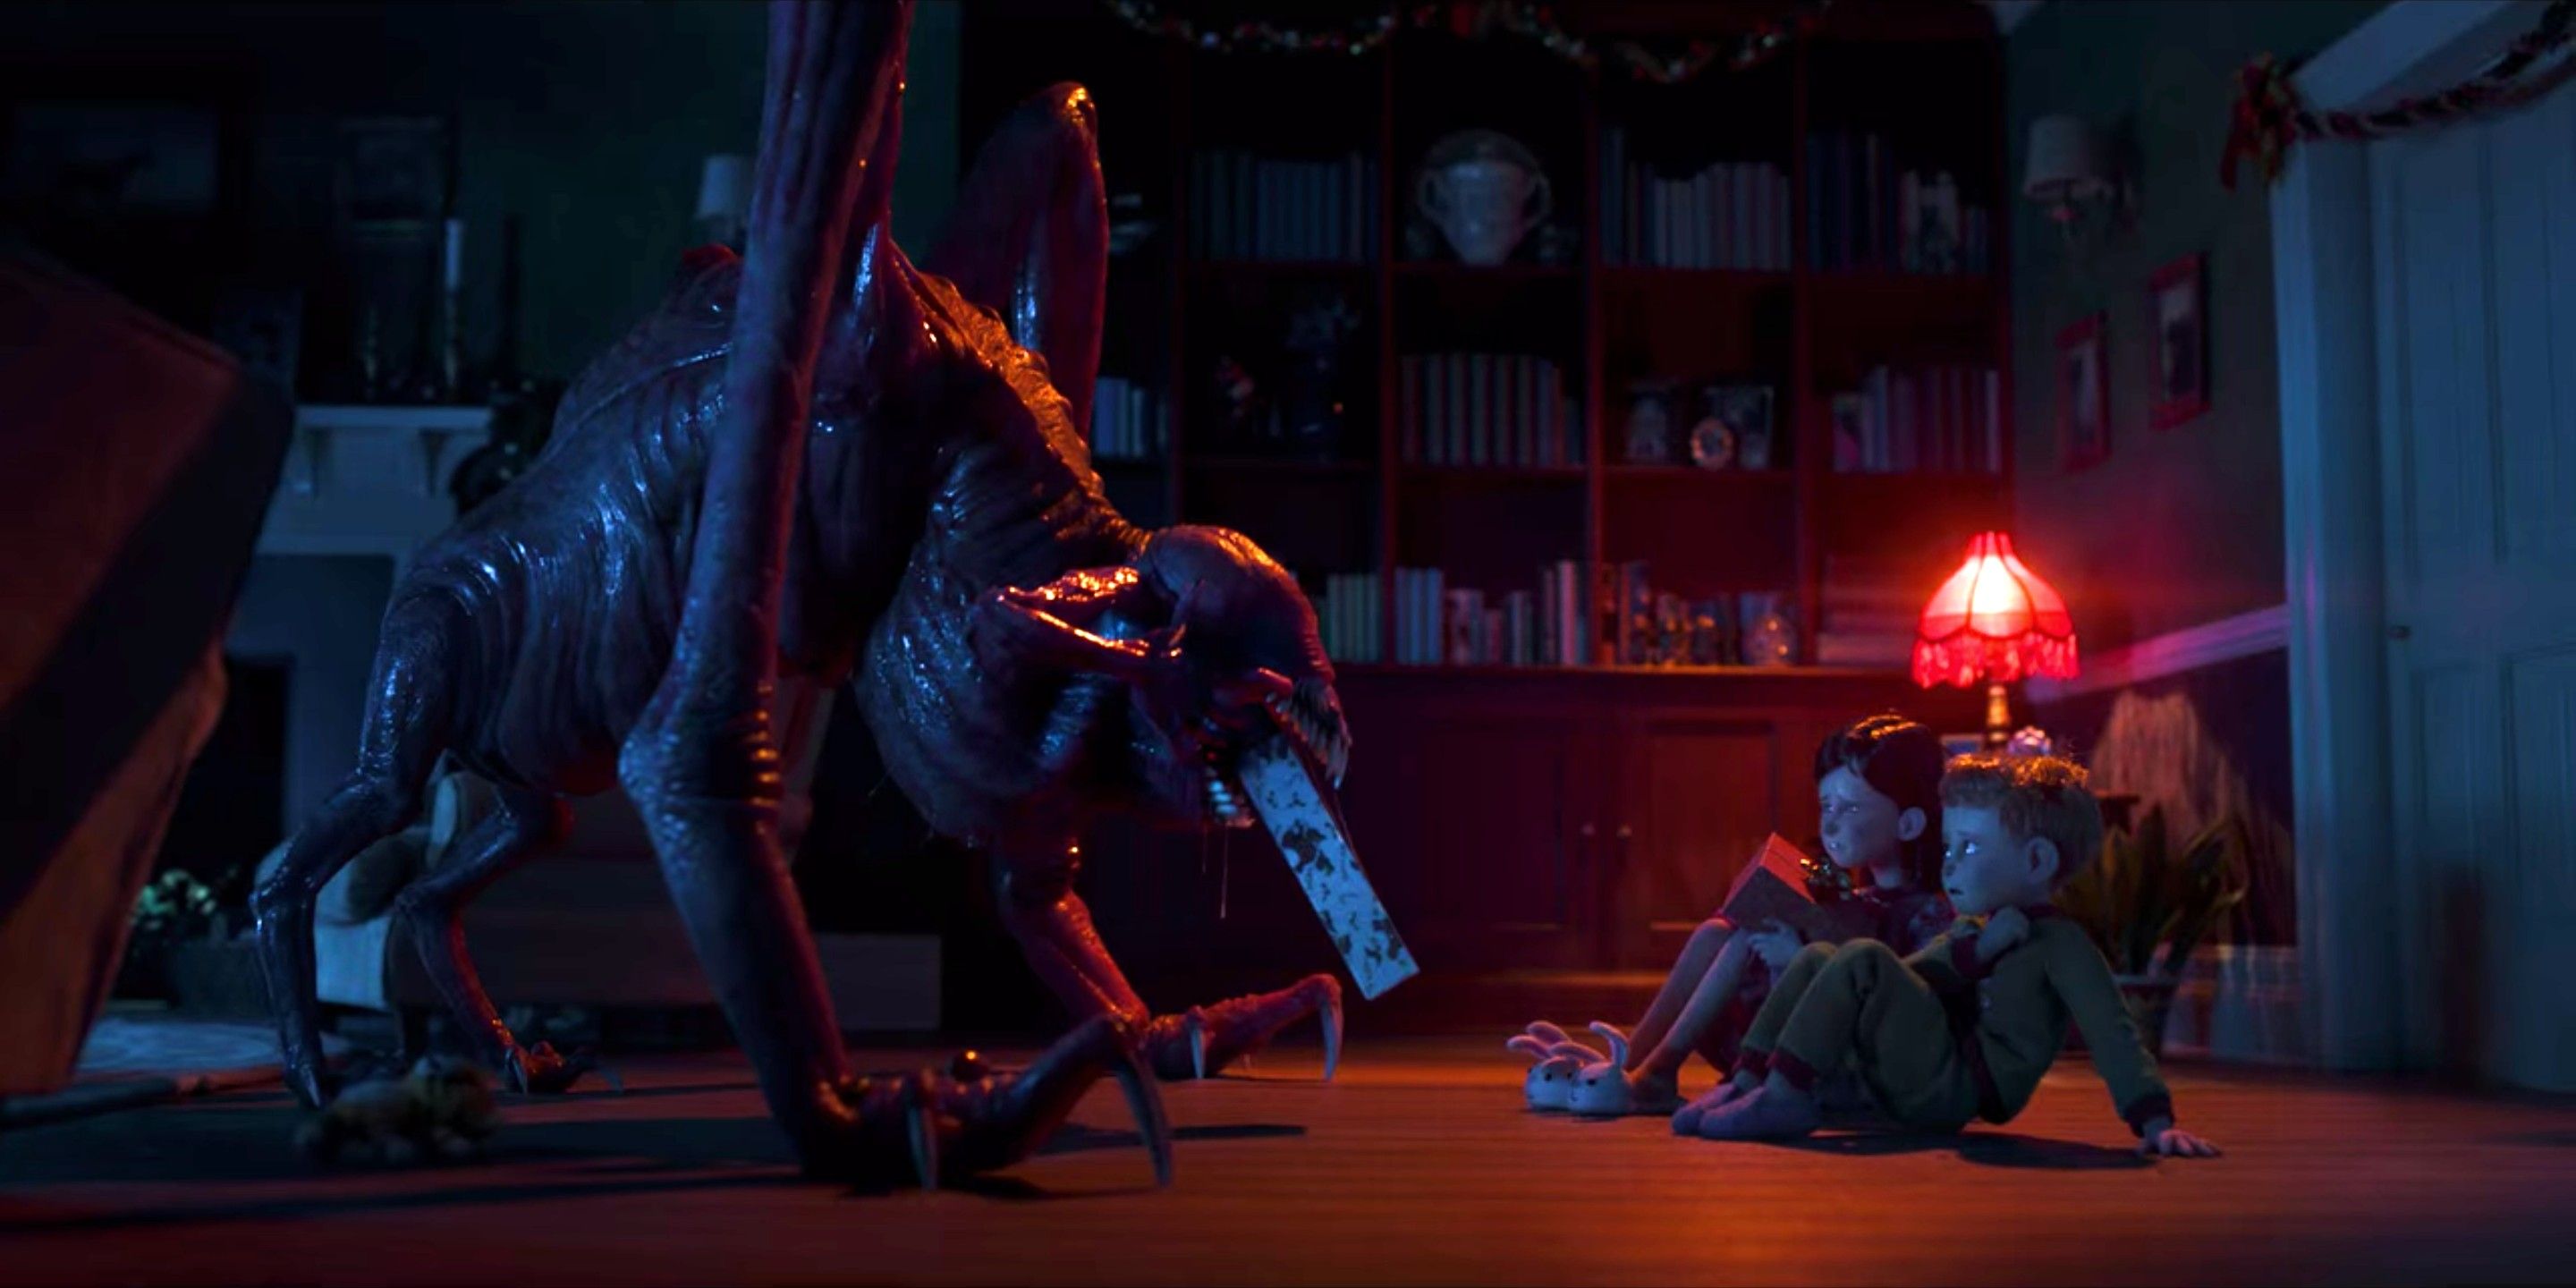 Love, Death & Robots: All Through The House Ending Explained